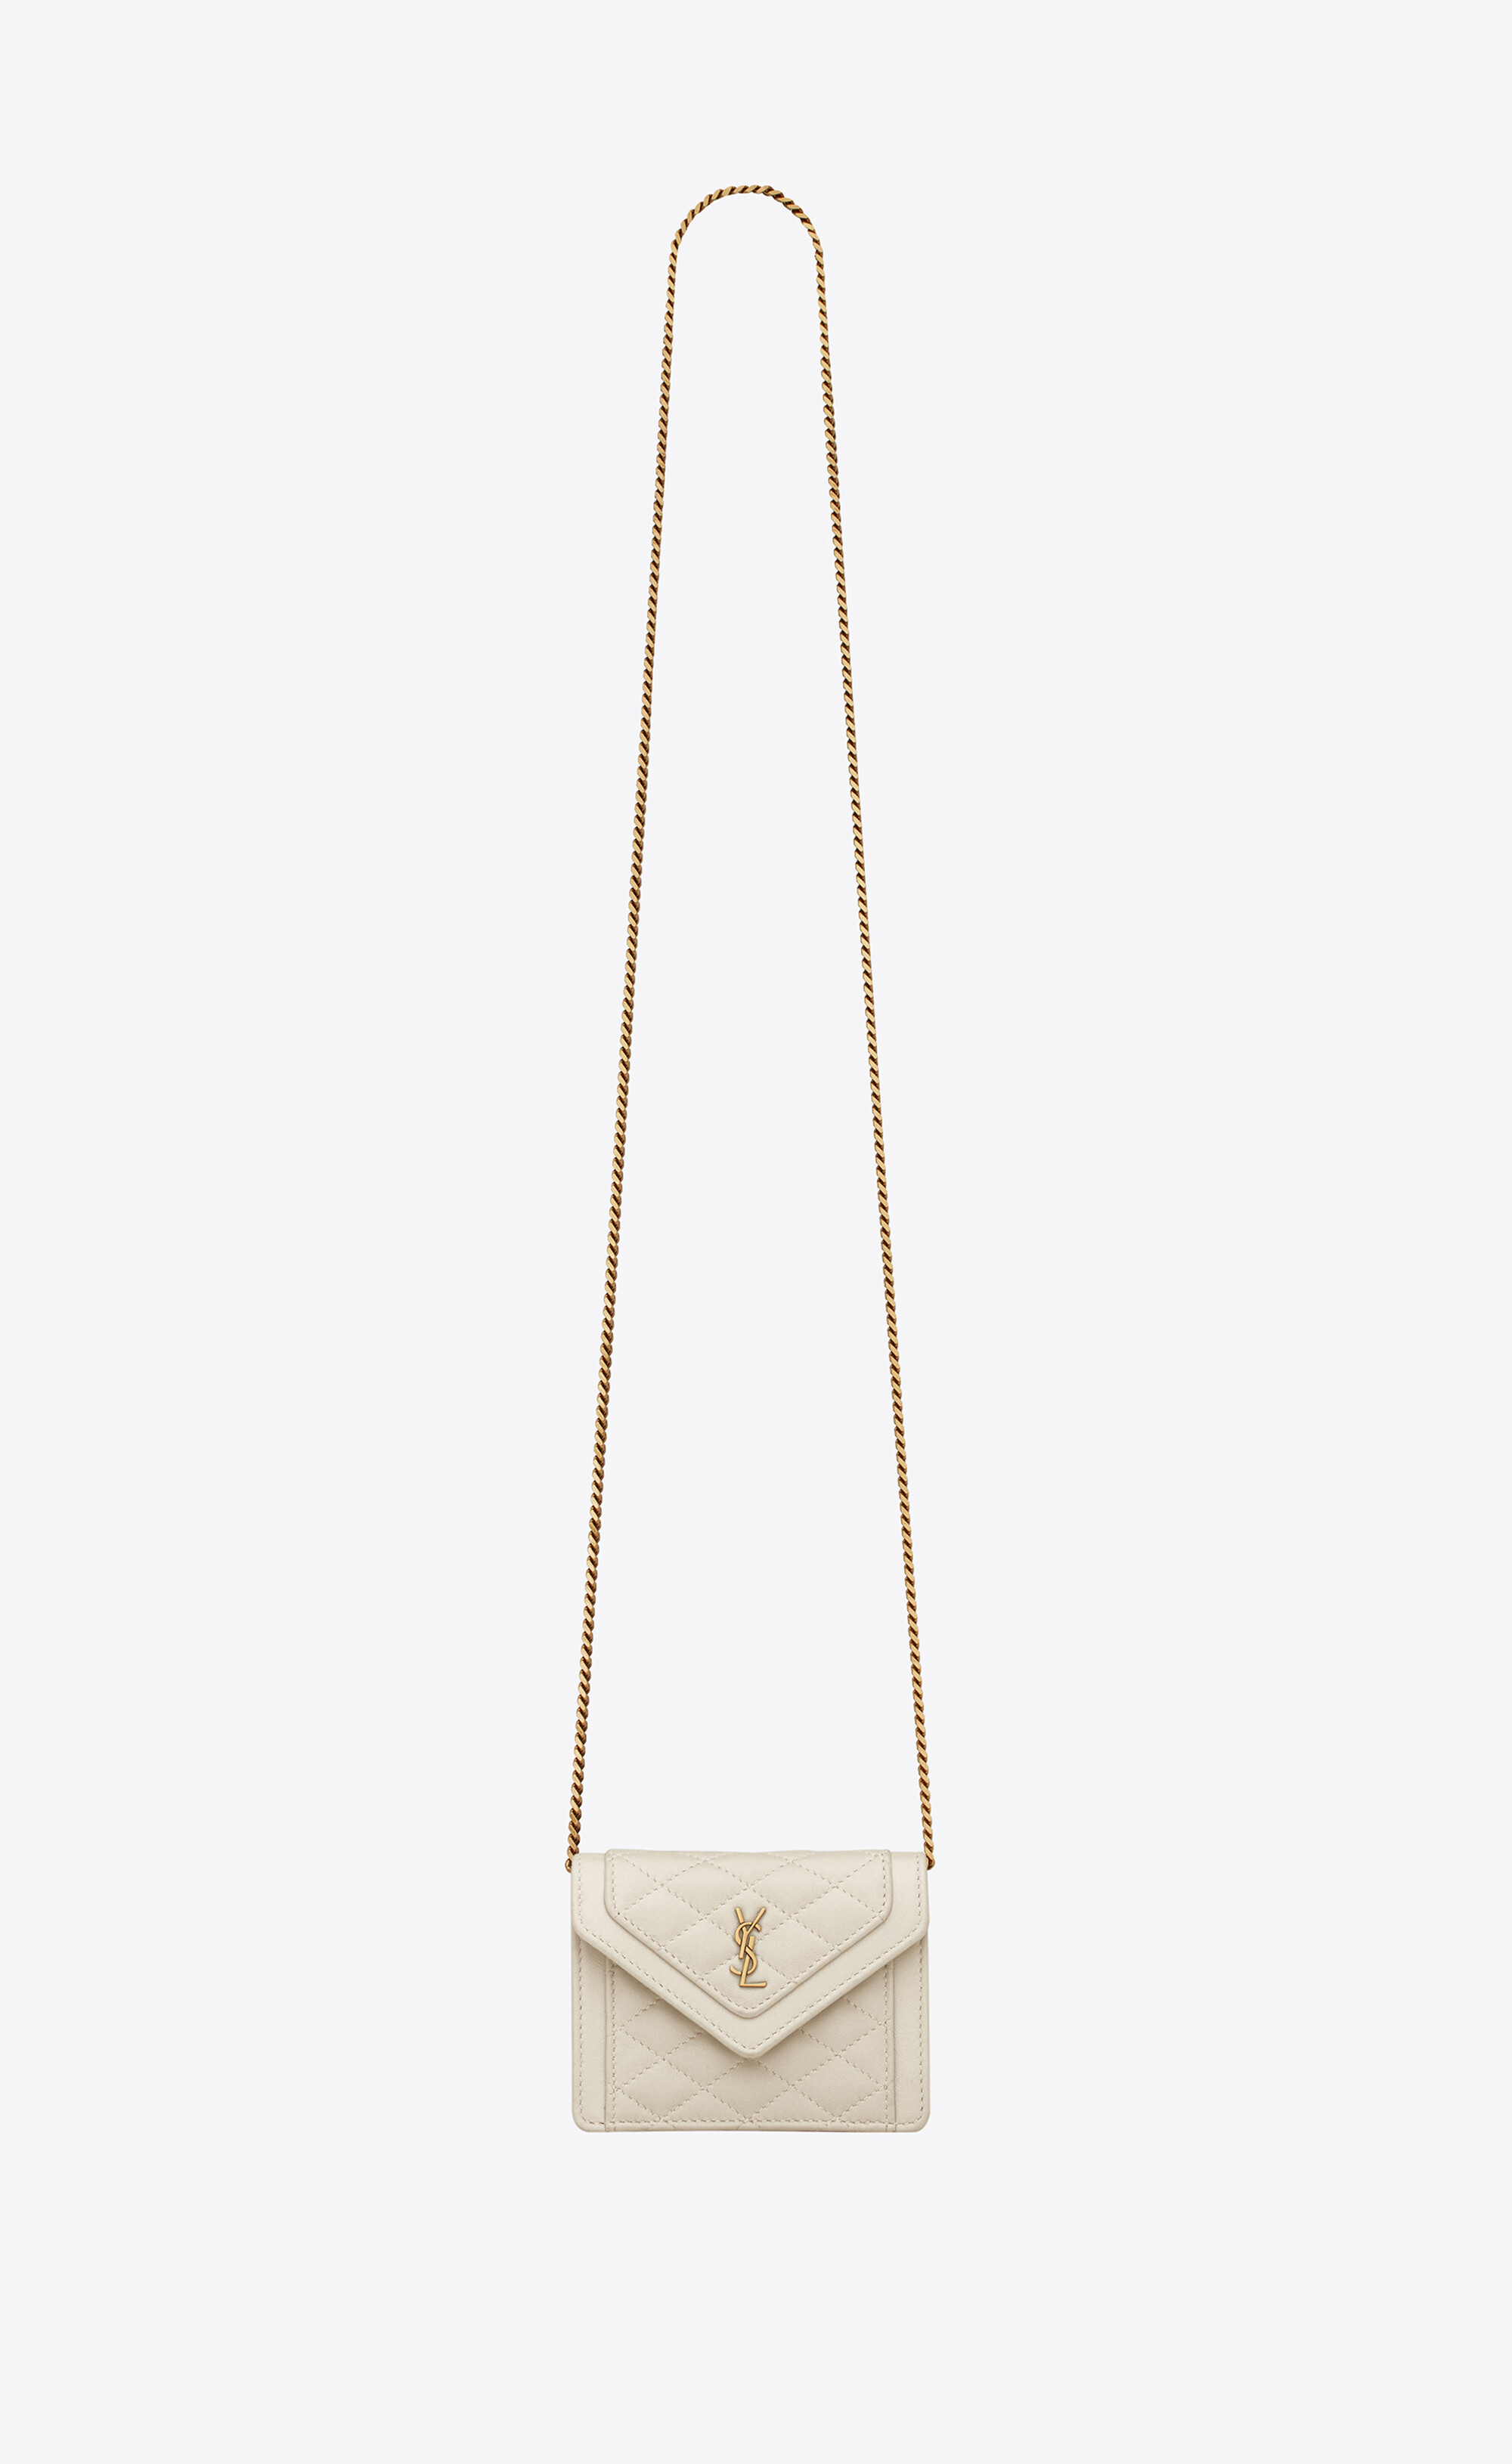 Saint Laurent Gaby Micro Quilted Bag - Neutrals for Women